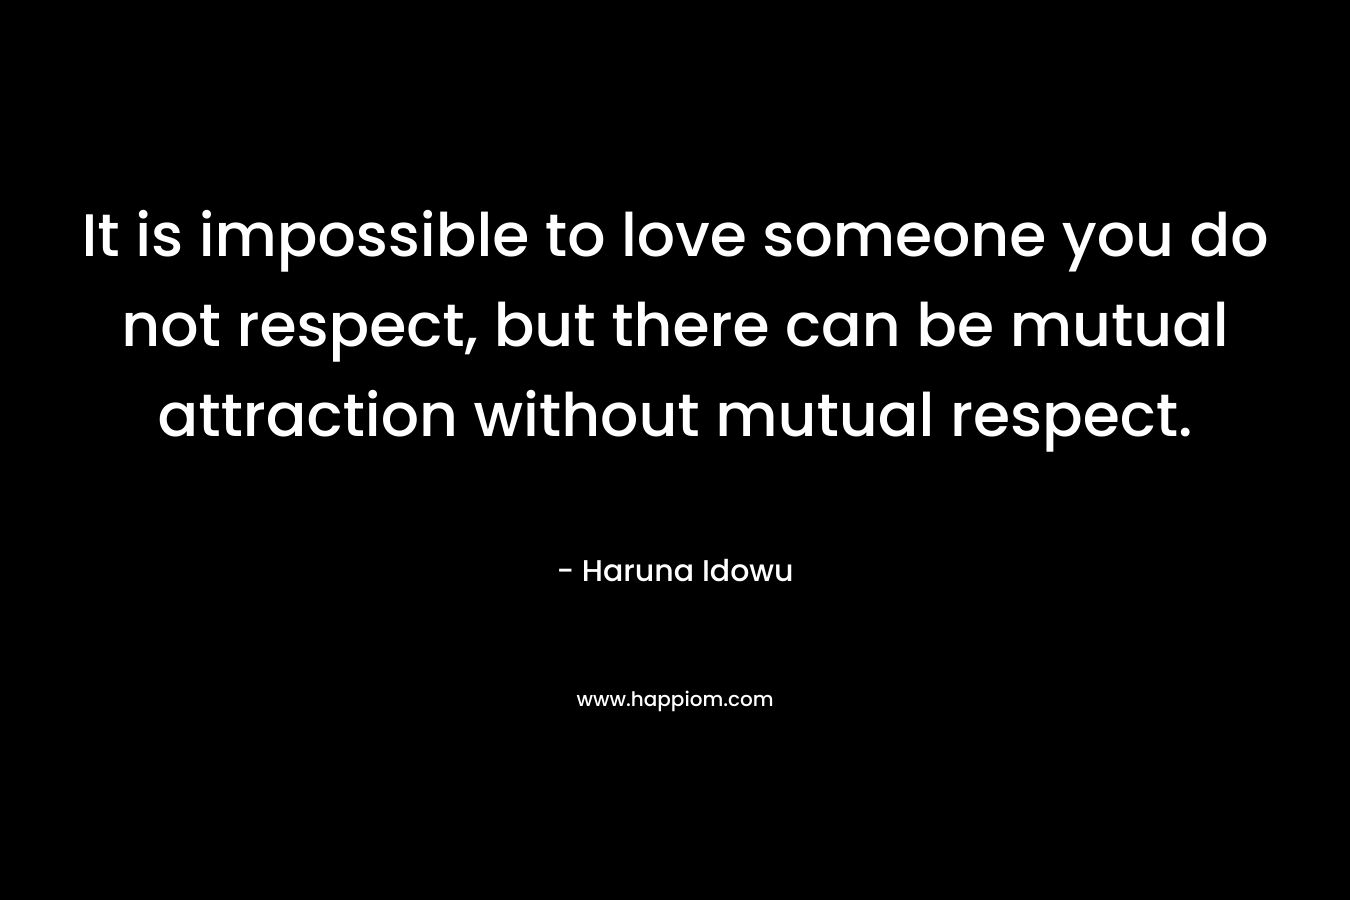 It is impossible to love someone you do not respect, but there can be mutual attraction without mutual respect. – Haruna Idowu